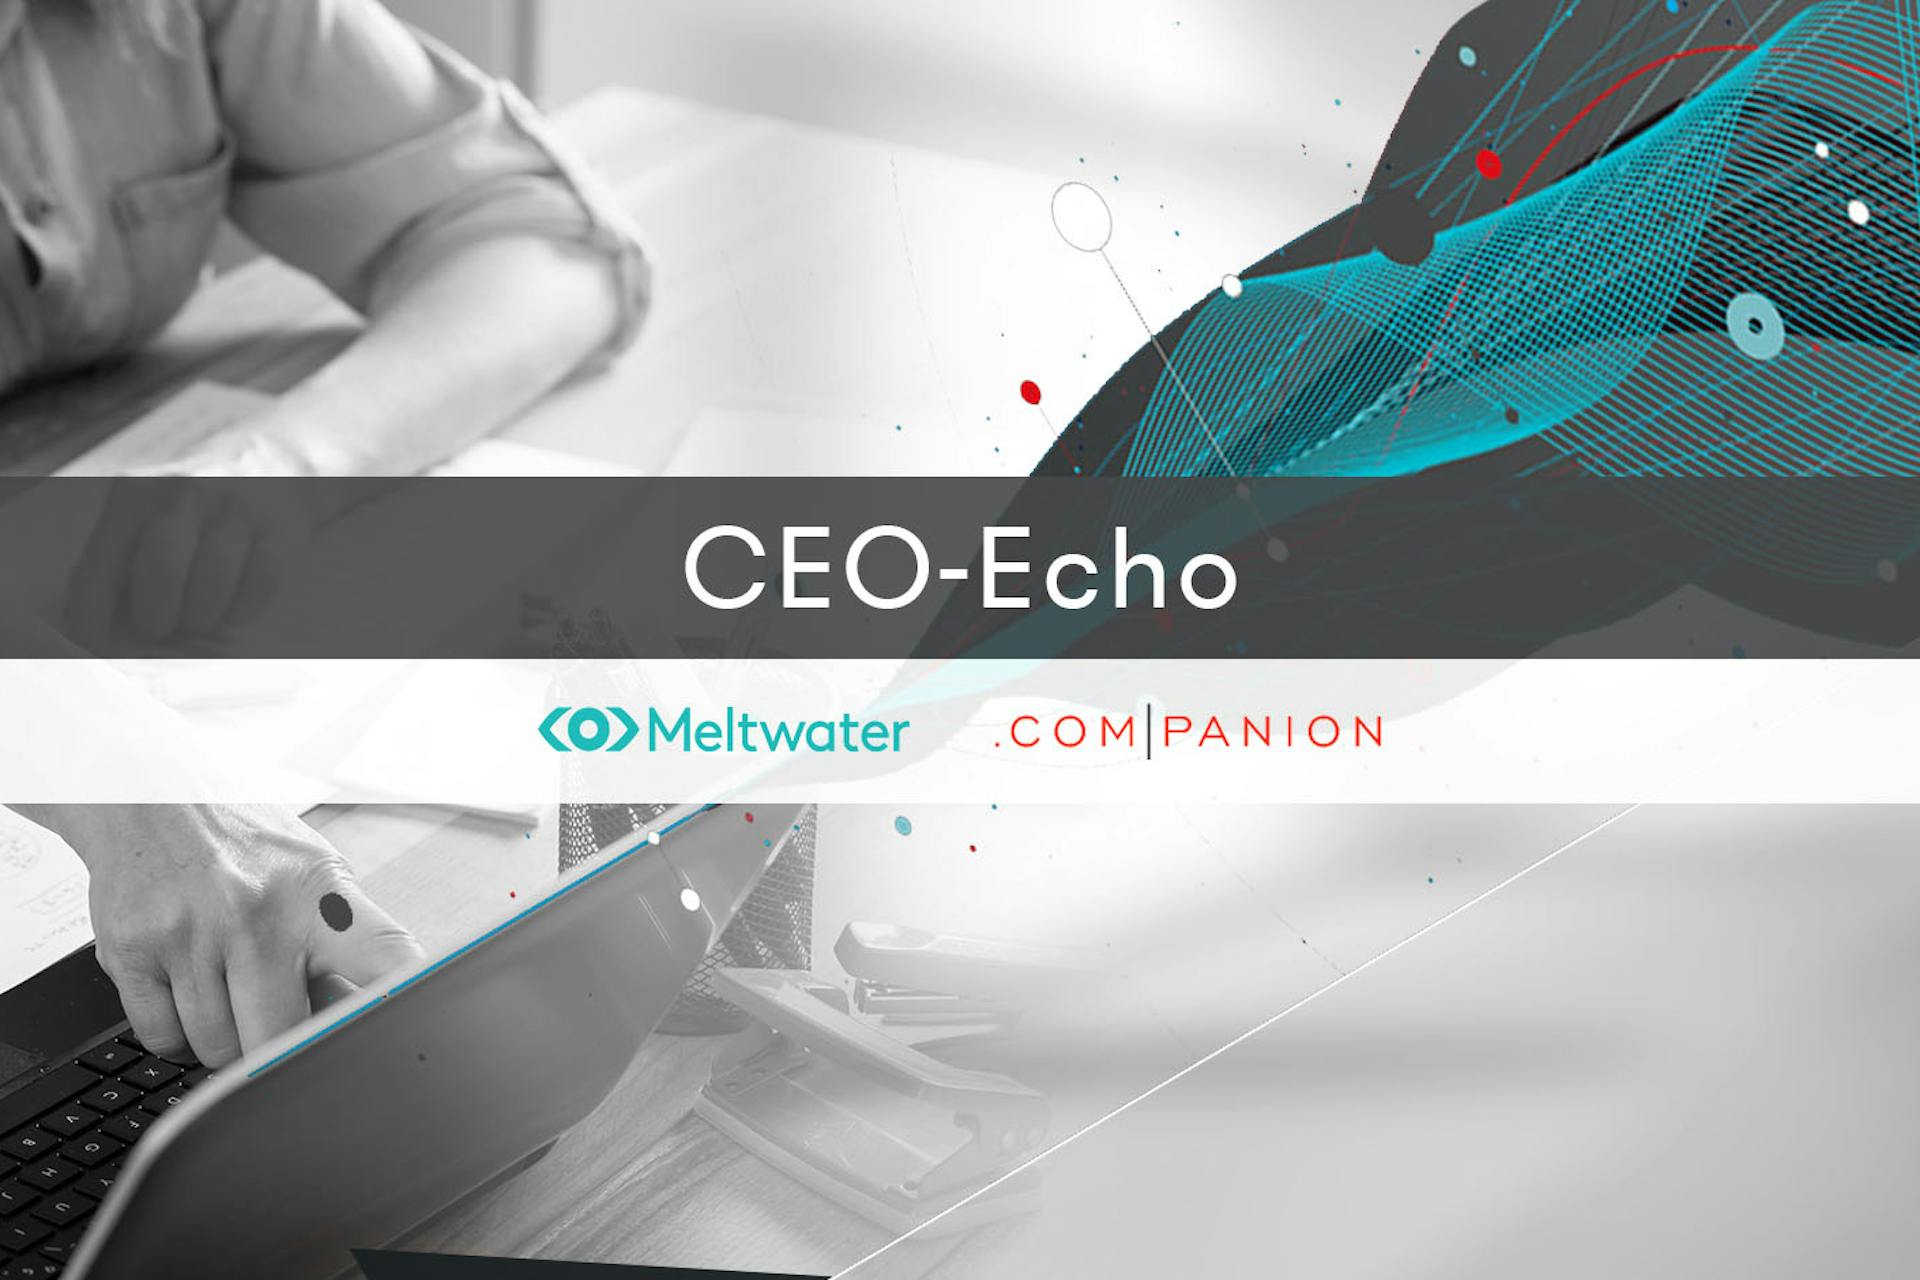 Meltwater companion CEO-Echo Banner